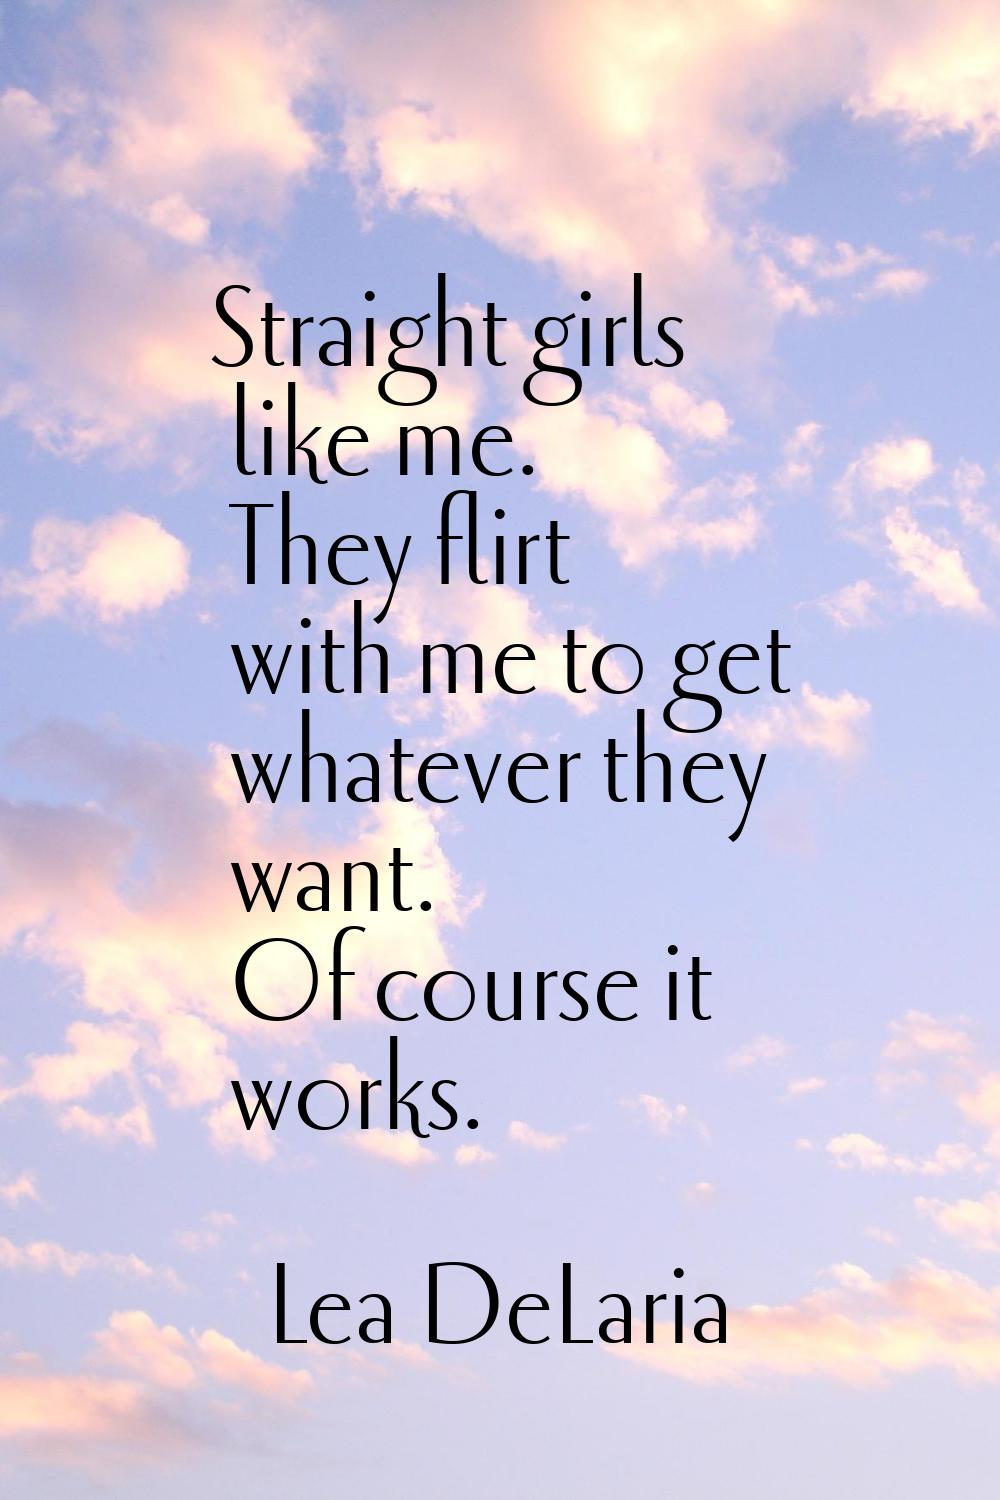 Straight girls like me. They flirt with me to get whatever they want. Of course it works.